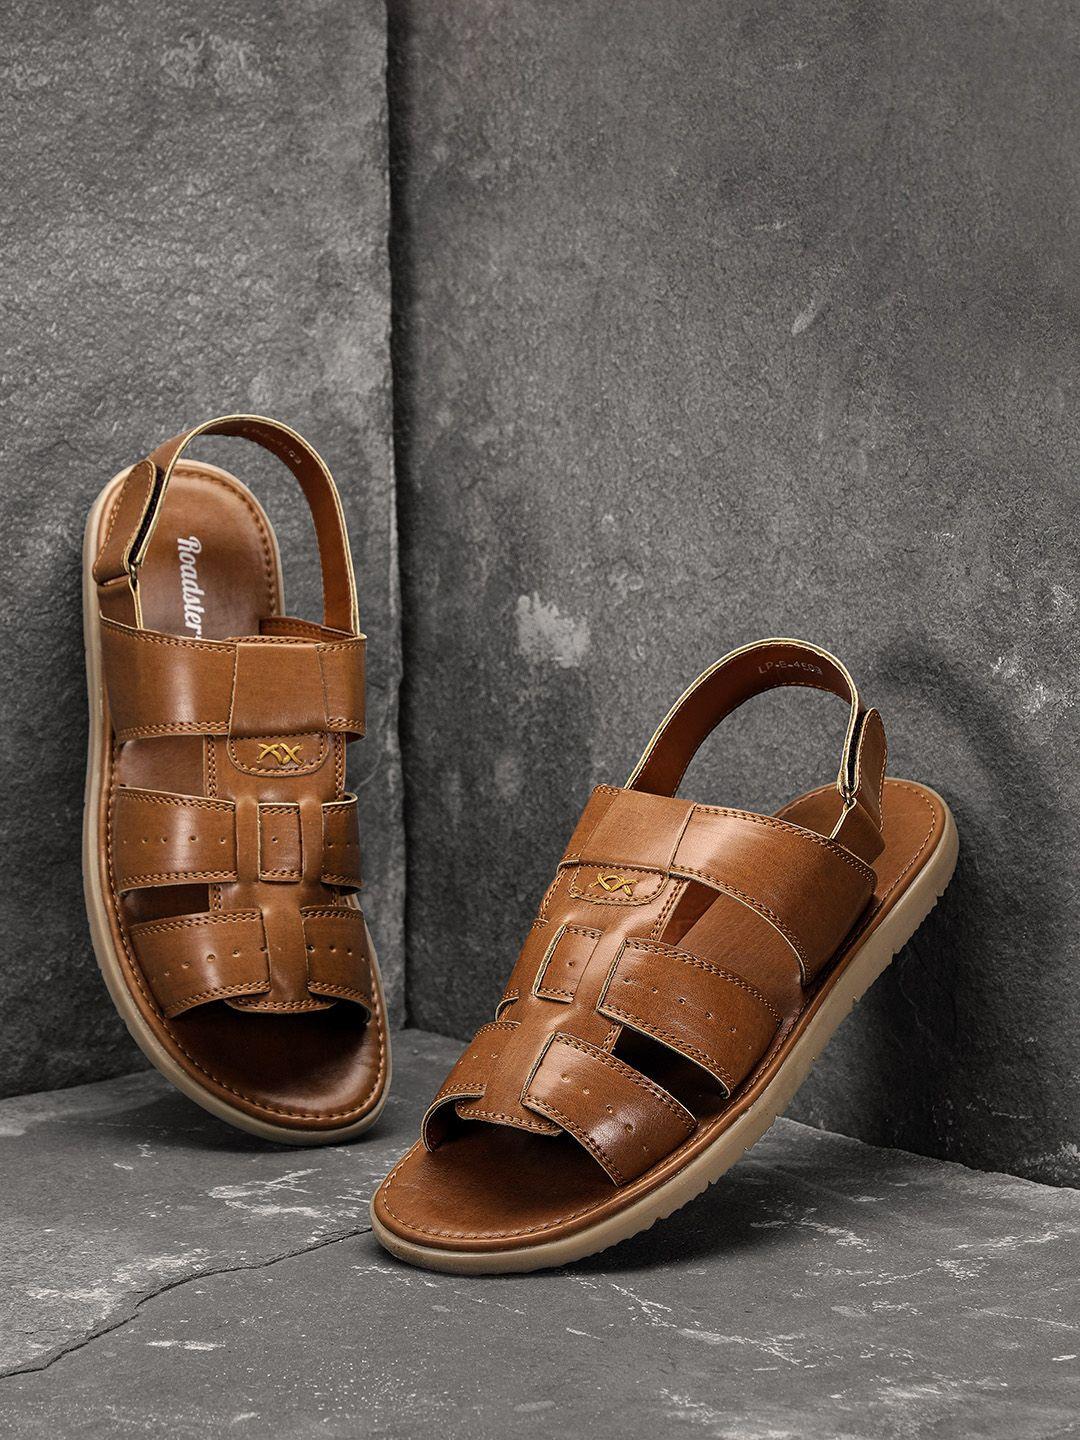 roadster men brown solid comfort sandals with perforated detail